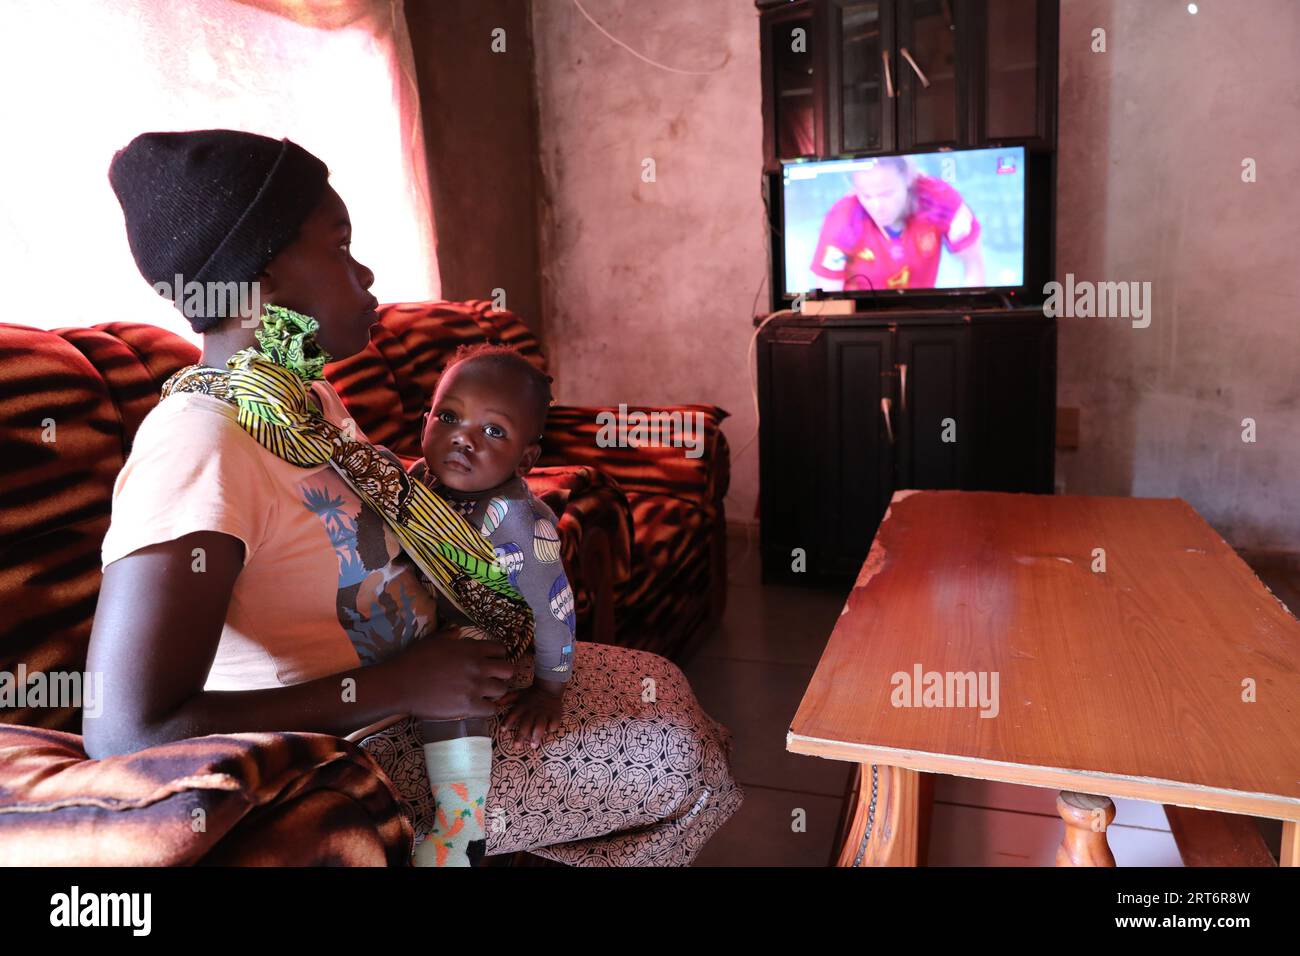 (230911) -- MAPUTO, Sept. 11, 2023 (Xinhua) -- A villager watches a satellite television program at home in Goba Village, Maputo Province, Mozambique, July 26, 2023. Government of Mozambique announced in May 2020 the completion of a project to bring digital satellite television signal to 1,000 villages in the country, which has benefited over 20,000 families.   The project, covering all the ten provinces and the capital city of Mozambique, was co-funded by China and implemented by the Chinese electronics and media company StarTimes. It trained work force particularly young people to be in char Stock Photo